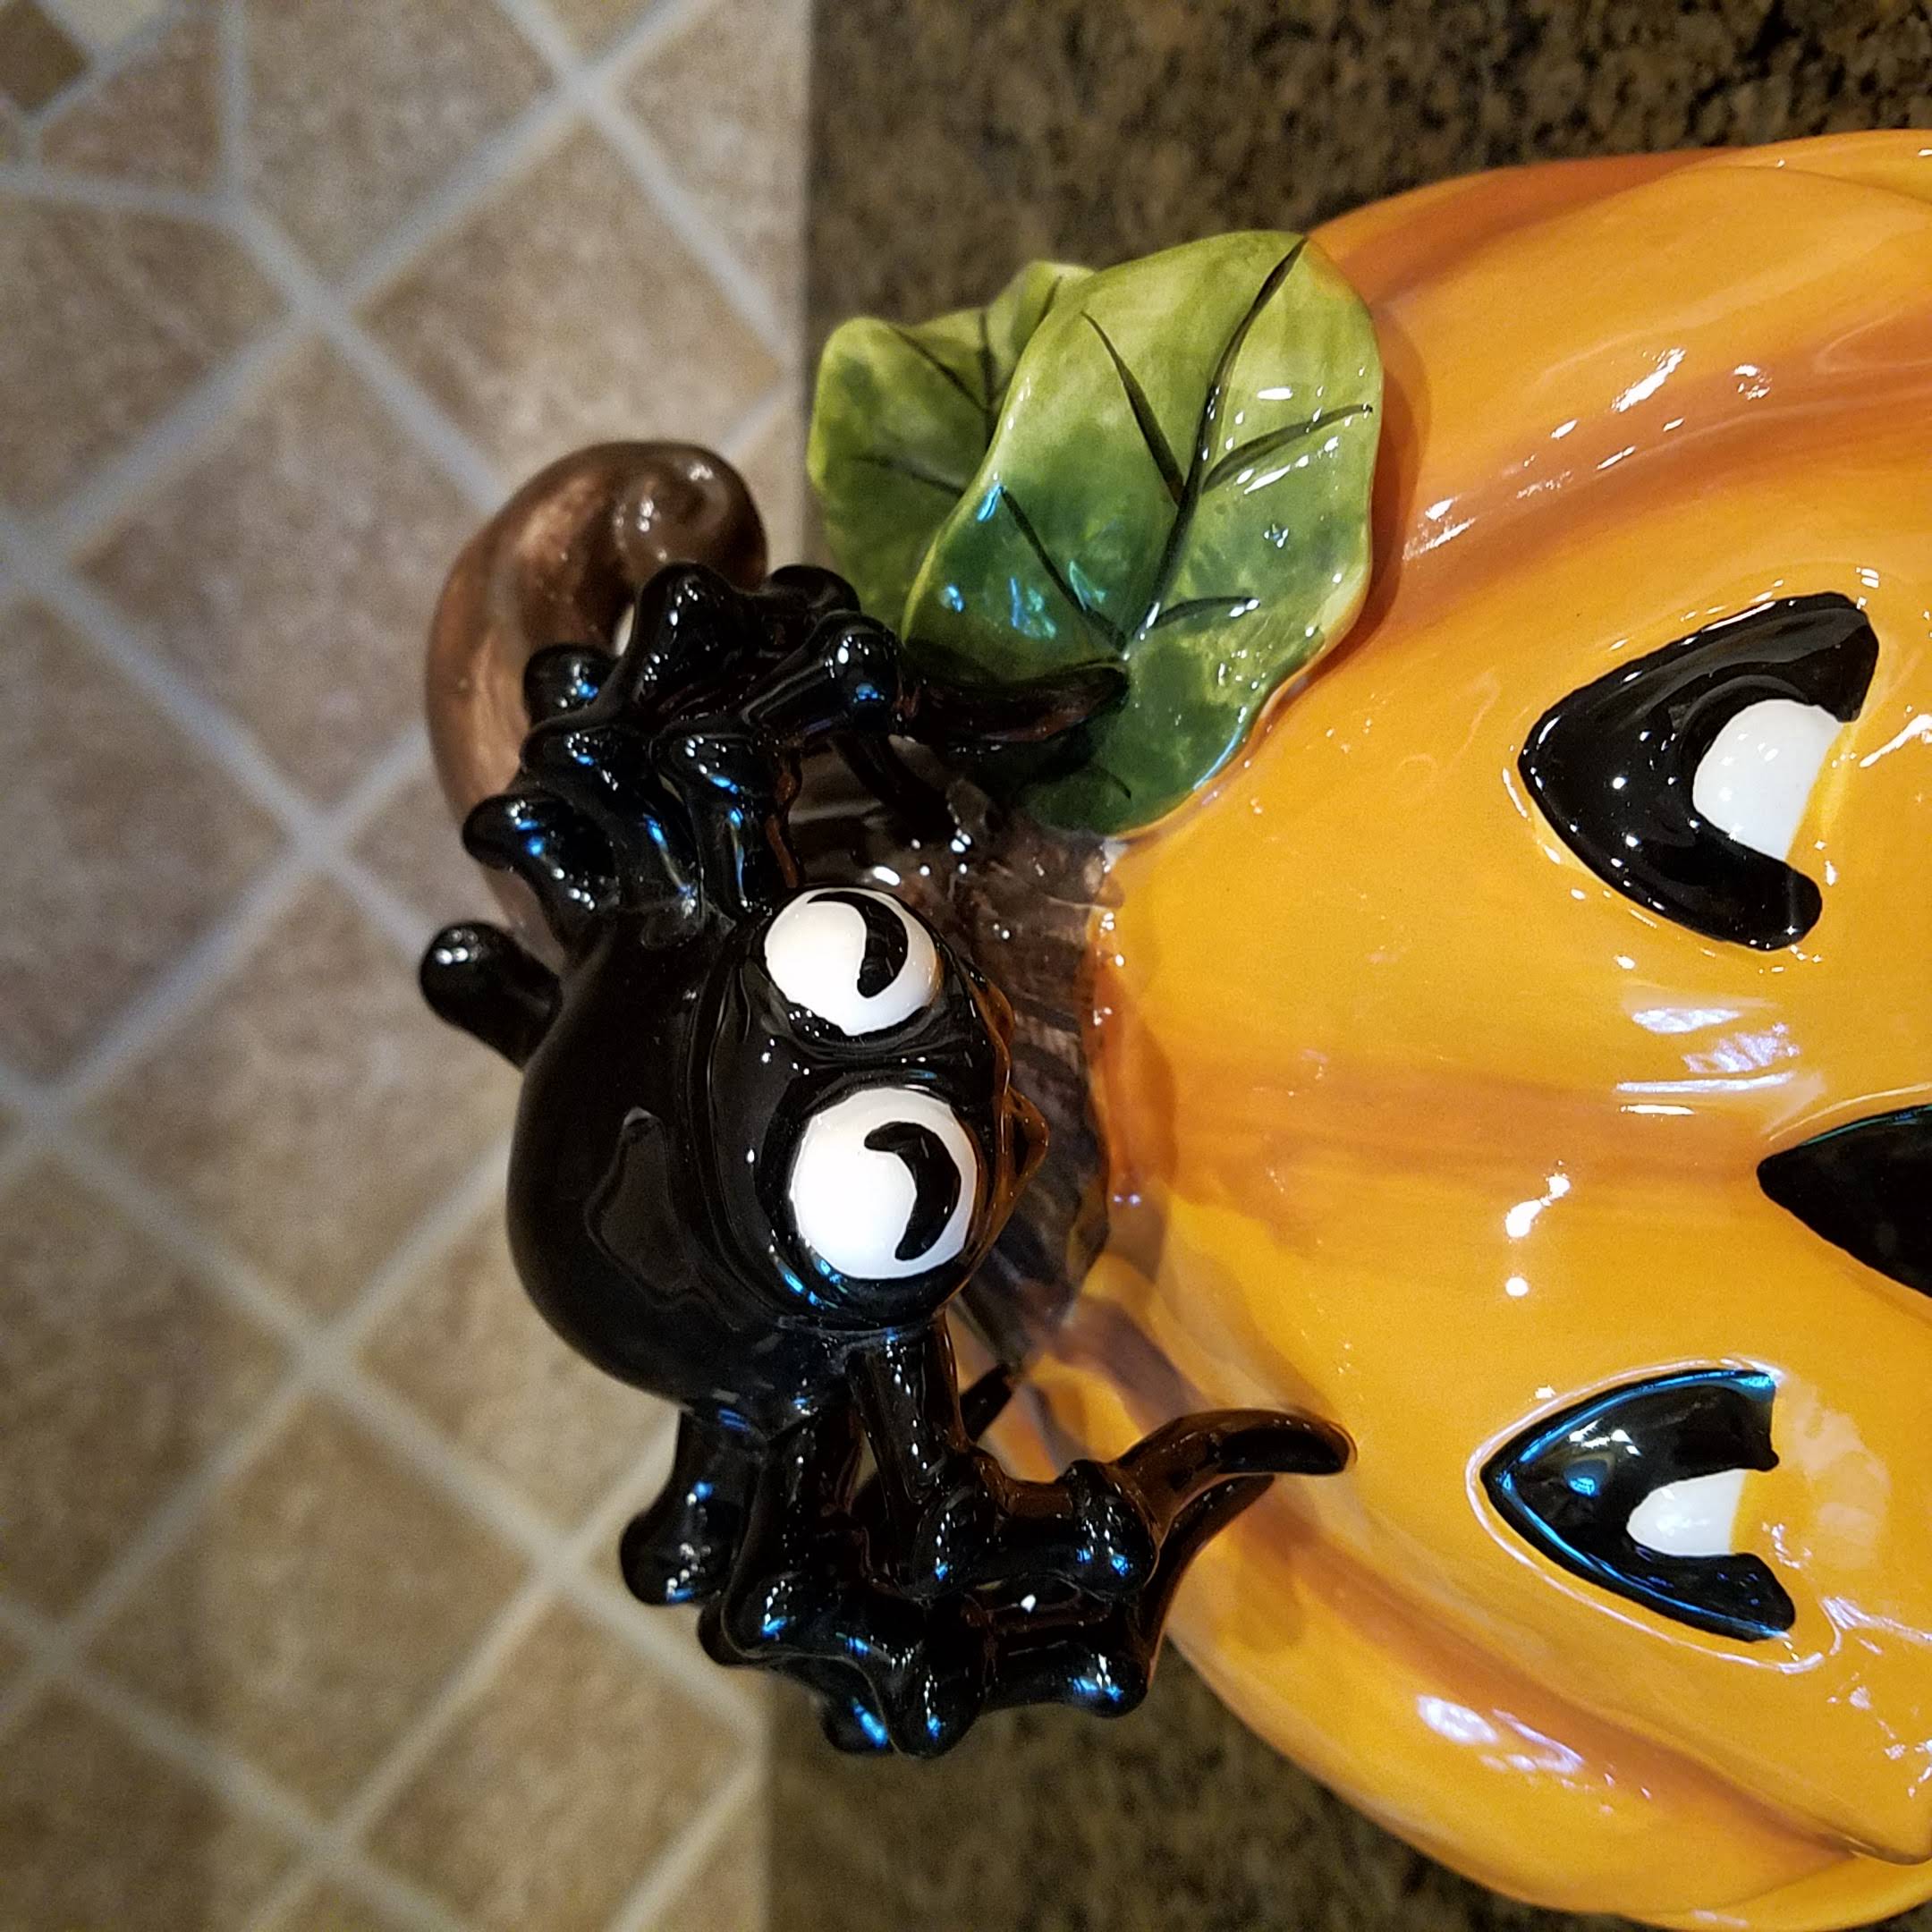 This Pumpkin Halloween Spider Candy Bowl Ceramic Blue Sky Kitchen Decor Collectable is made with love by Premier Homegoods! Shop more unique gift ideas today with Spots Initiatives, the best way to support creators.